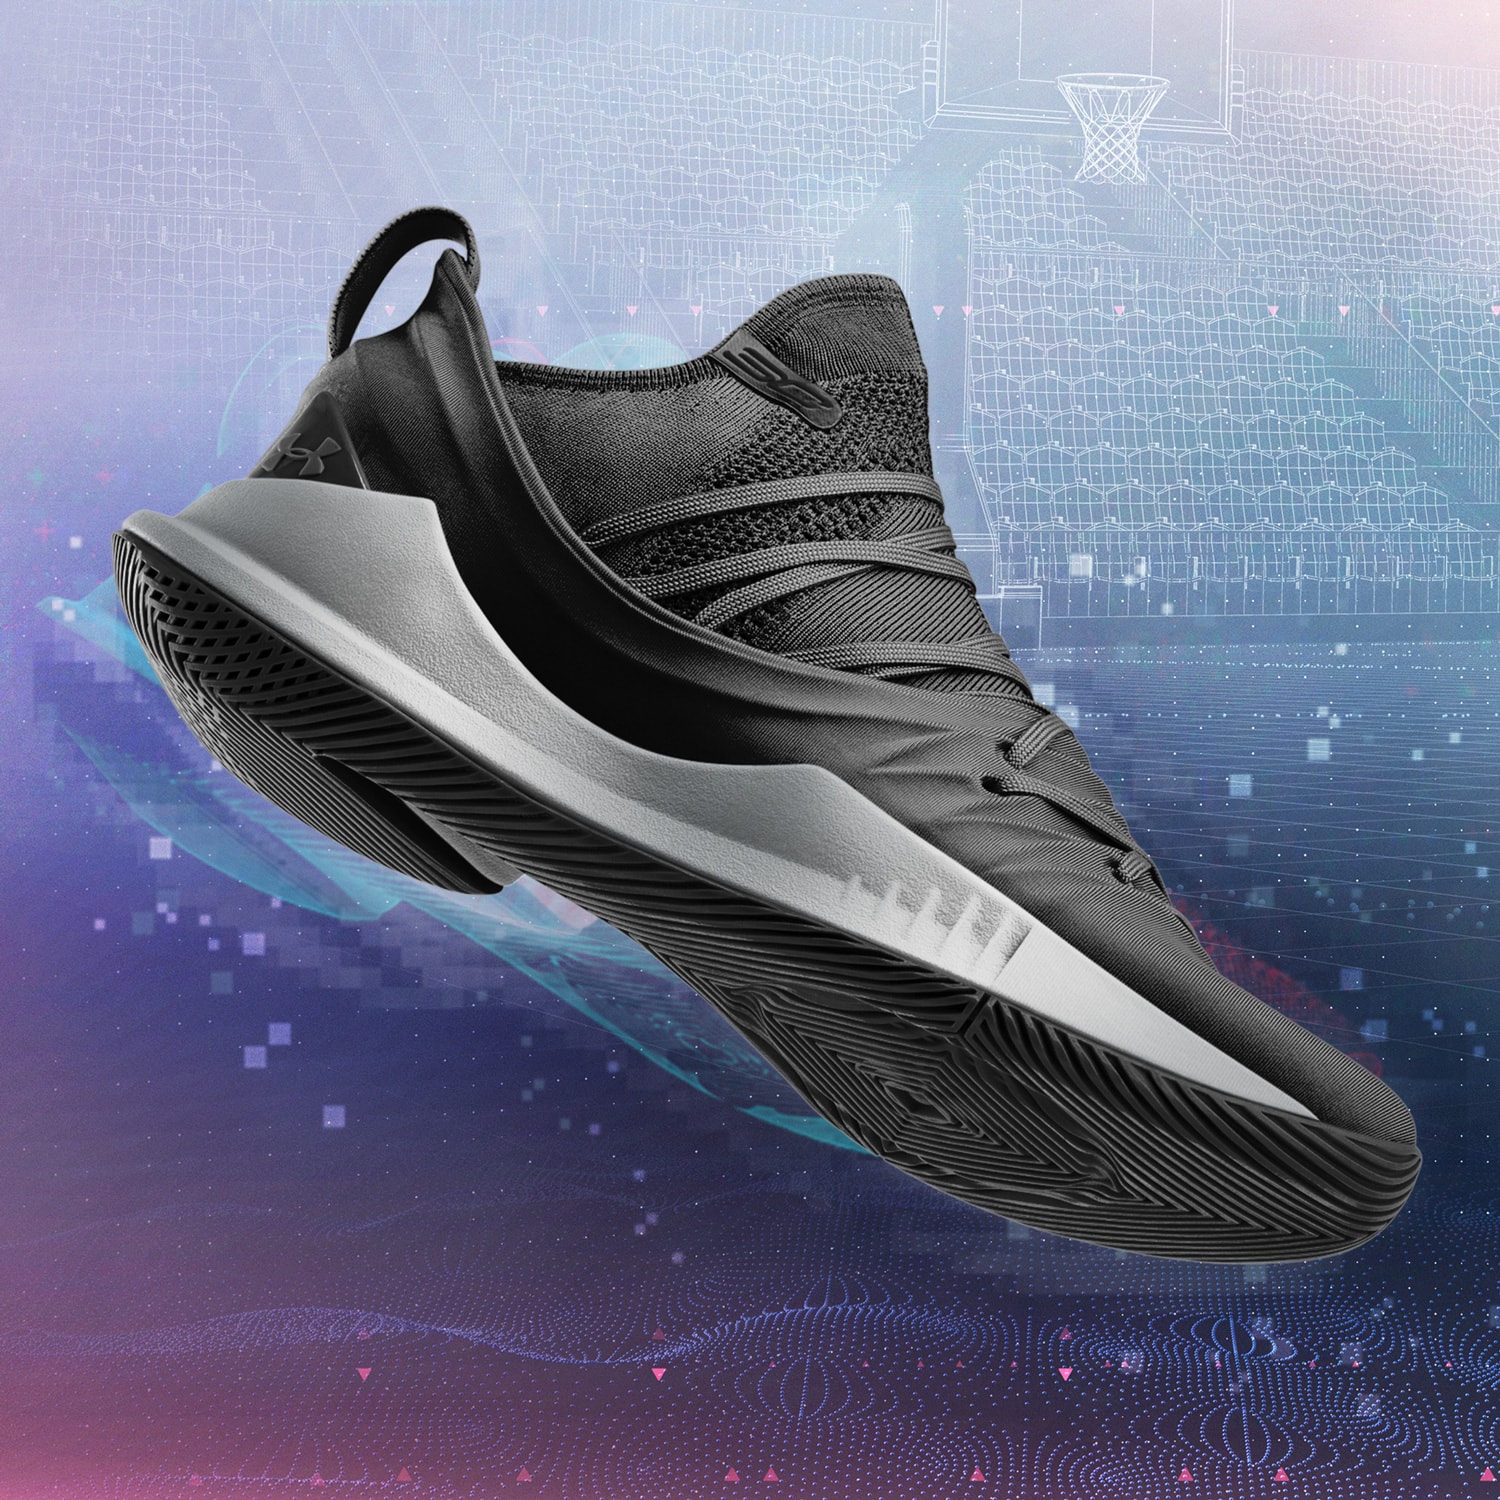 Under Armour Curry 5 ICON Footwear Customization